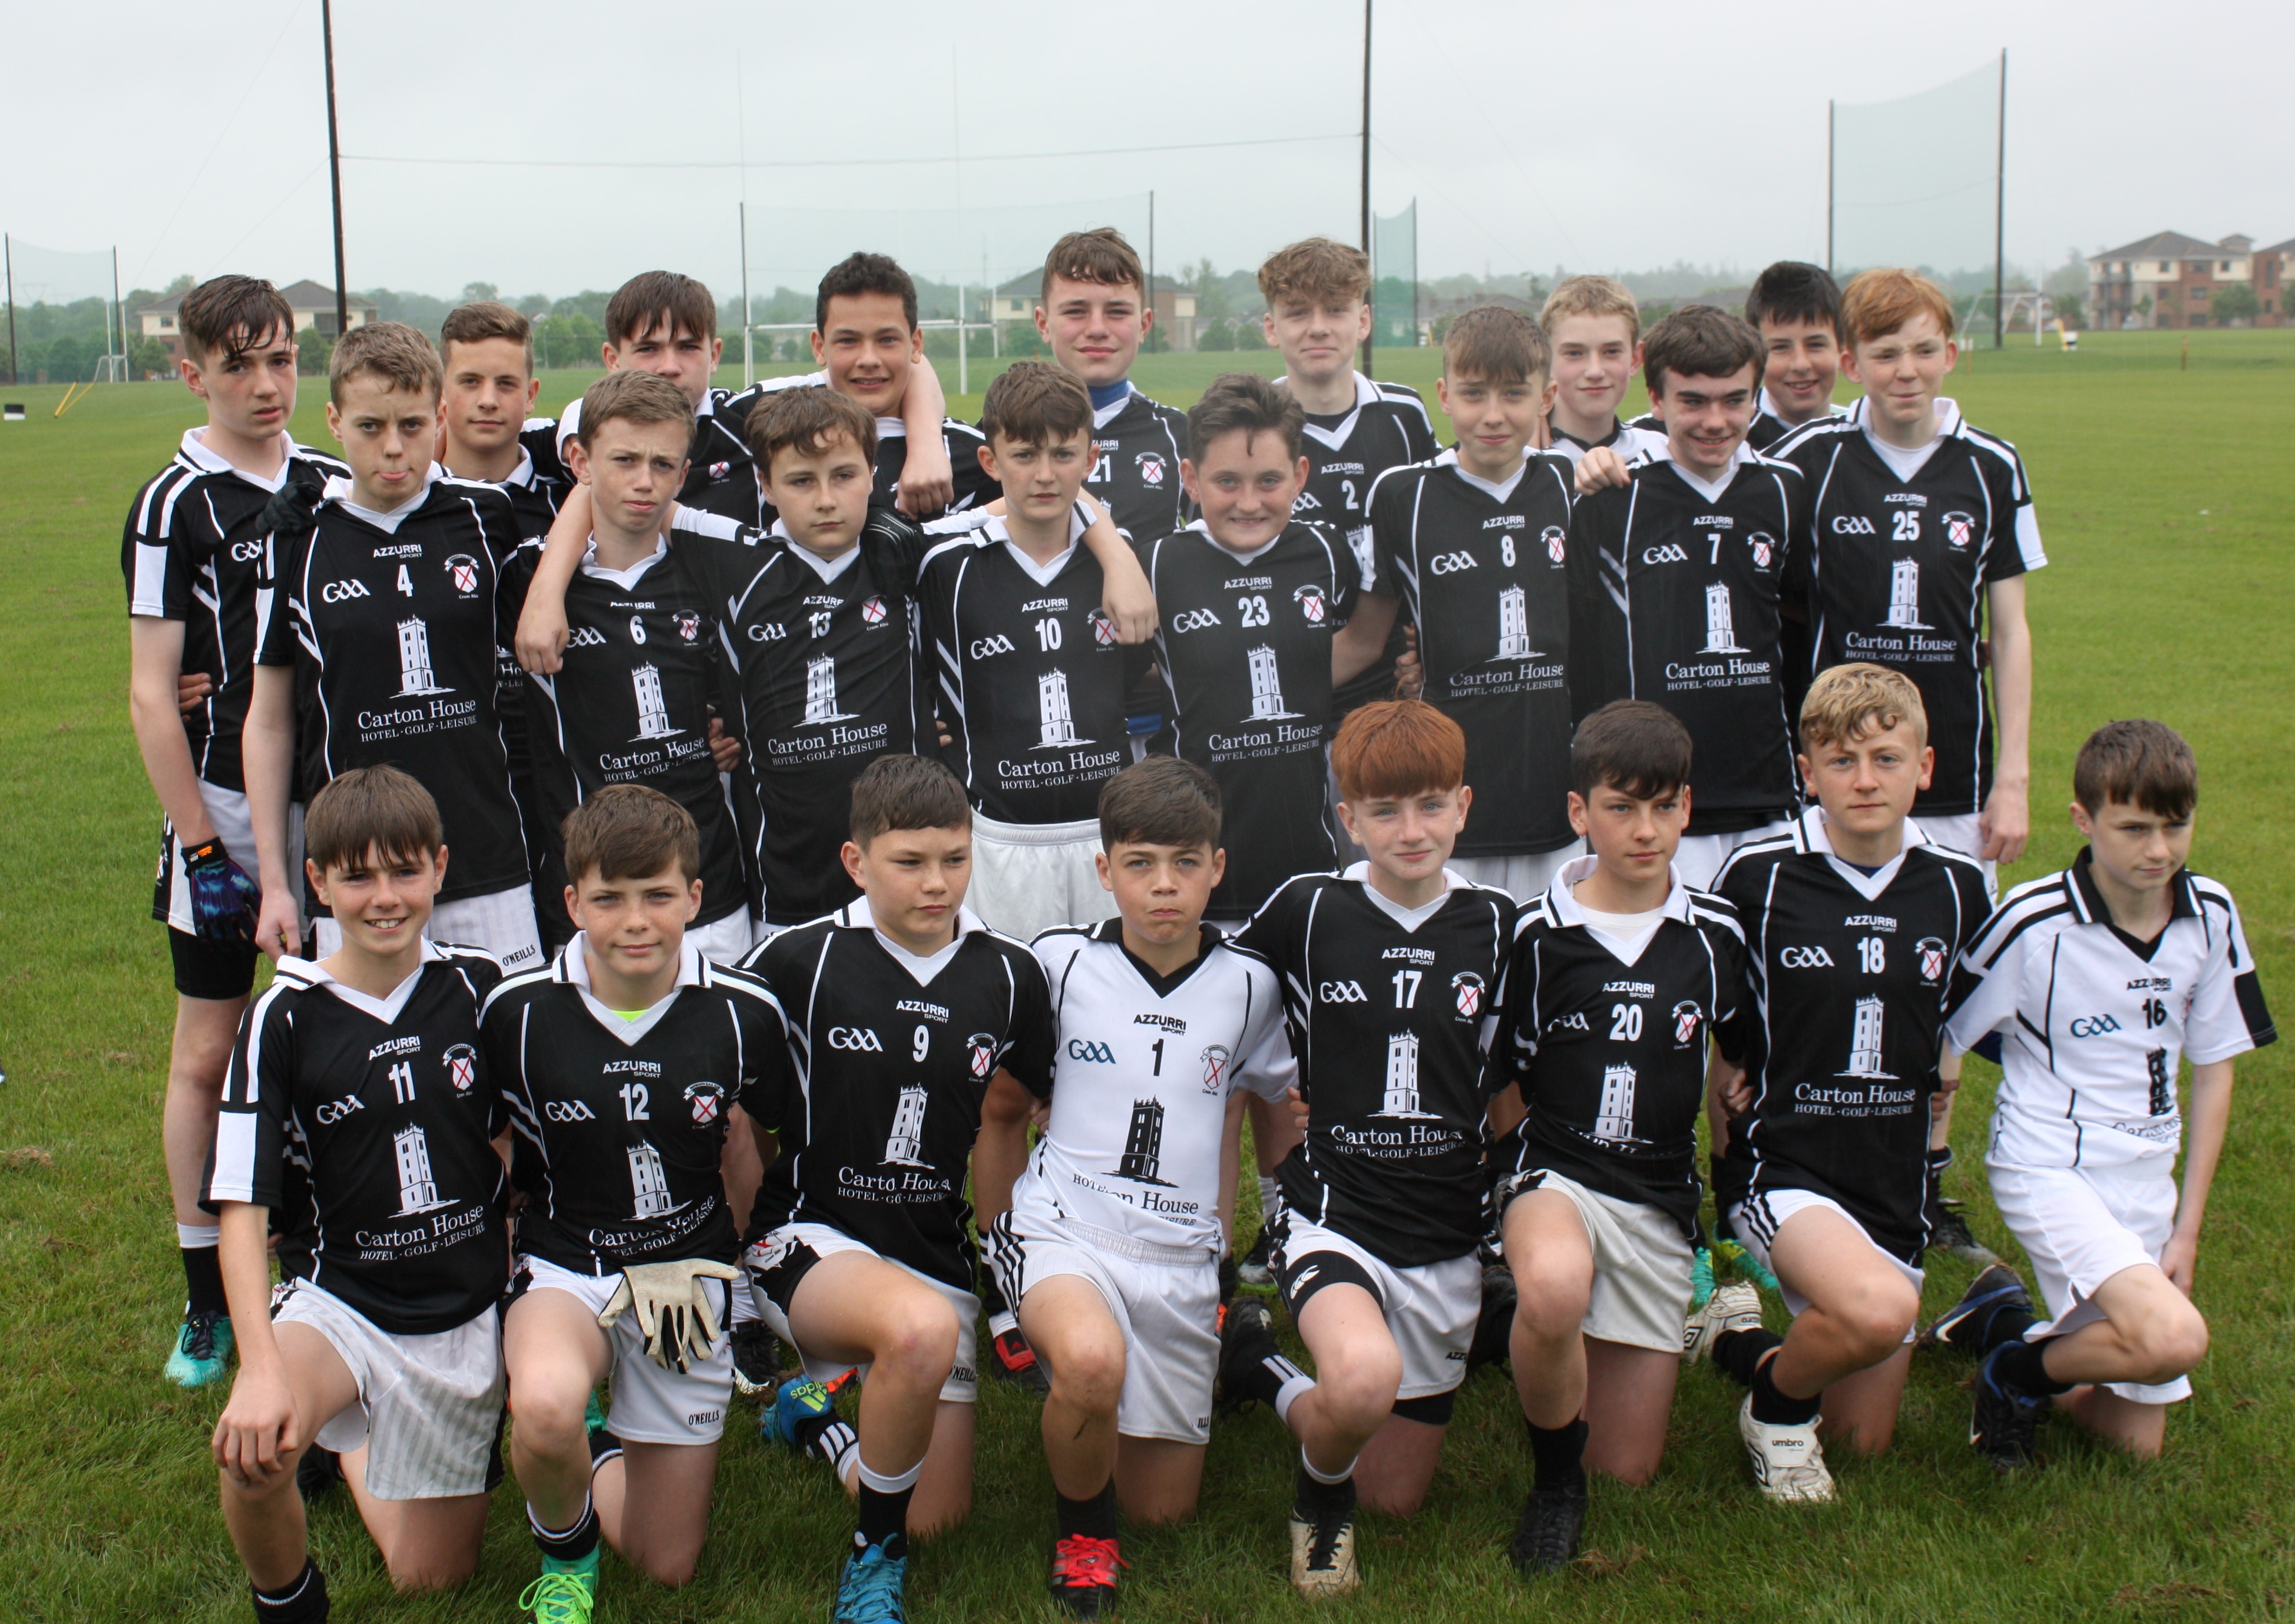 Cremartin welcomes Maynooth to Féile